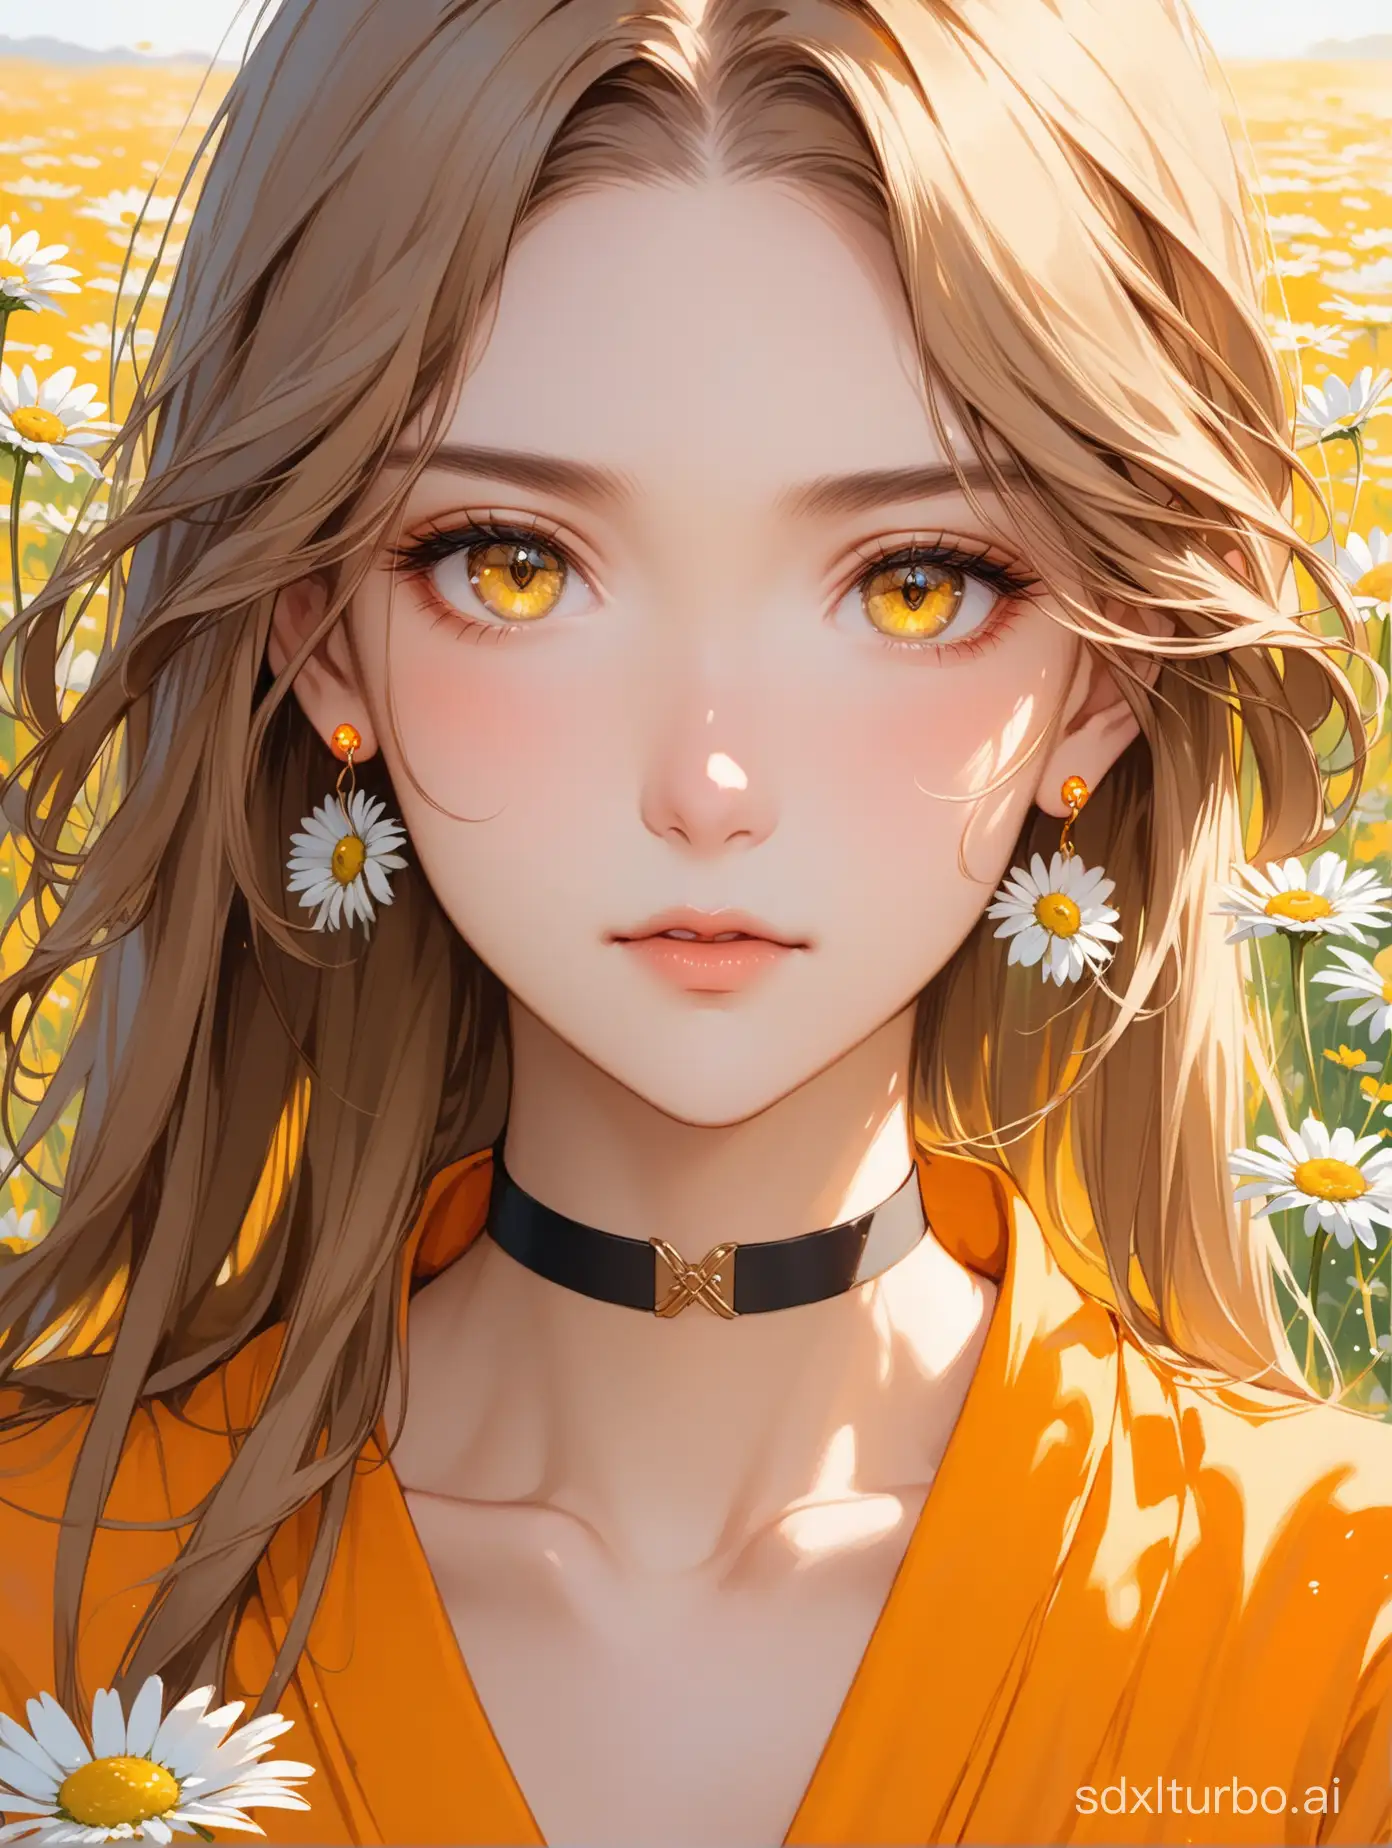 Top quality, masterpiece, a girl, light brown long hair, slightly curled, yellow earrings, neckband, (orange clothing), (exquisite hair portrayal), (exquisite yellow eyes portrayal), (exquisite facial features portrayal), solo, (daisies), portrait description, sense of brokenness